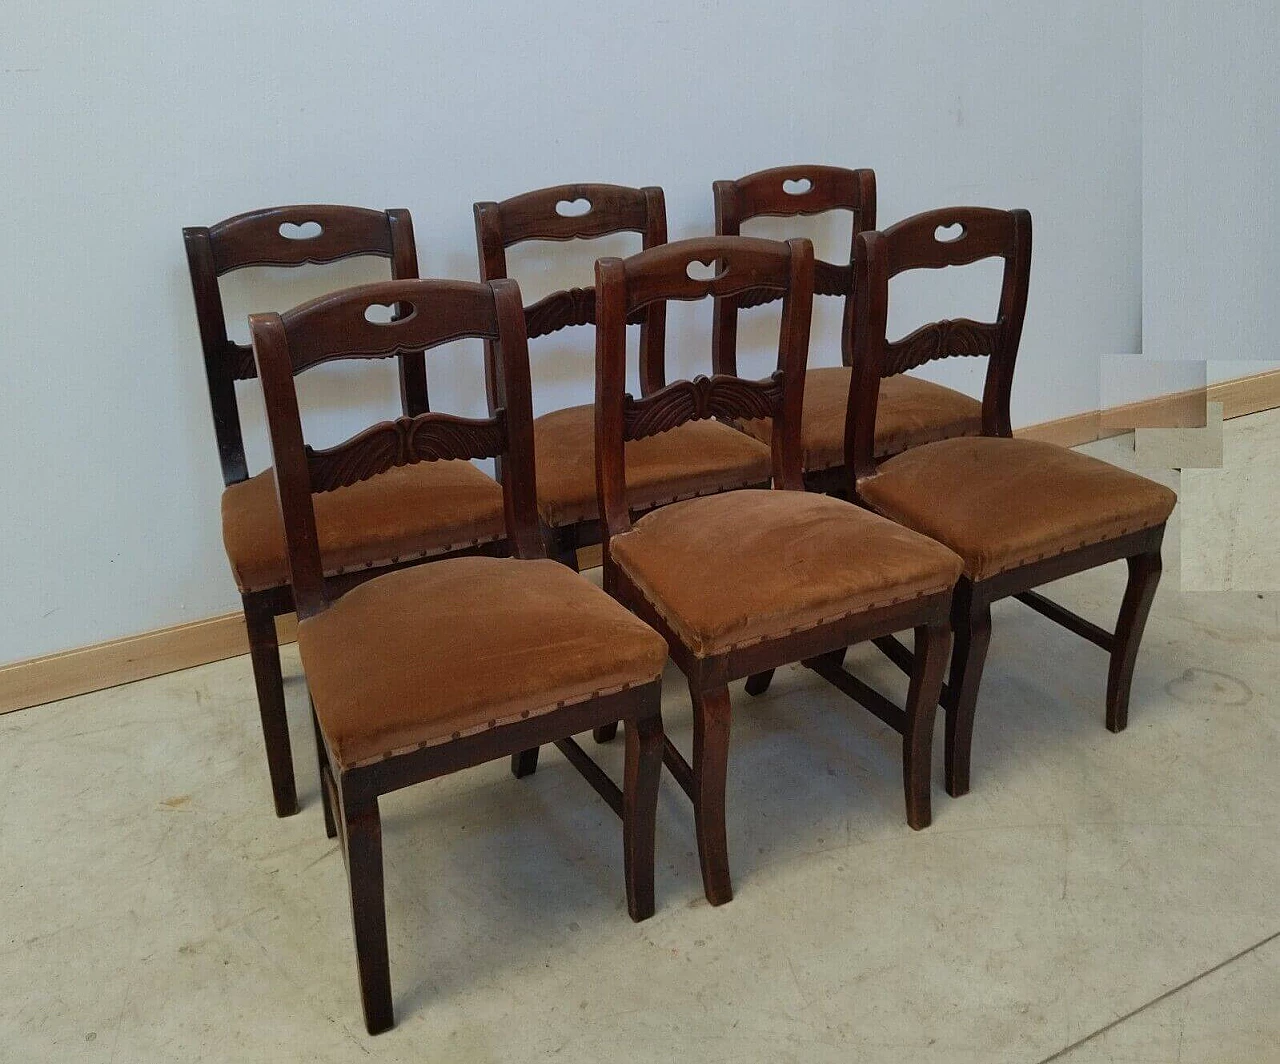 6 Empire-style walnut chairs, early 19th century 2